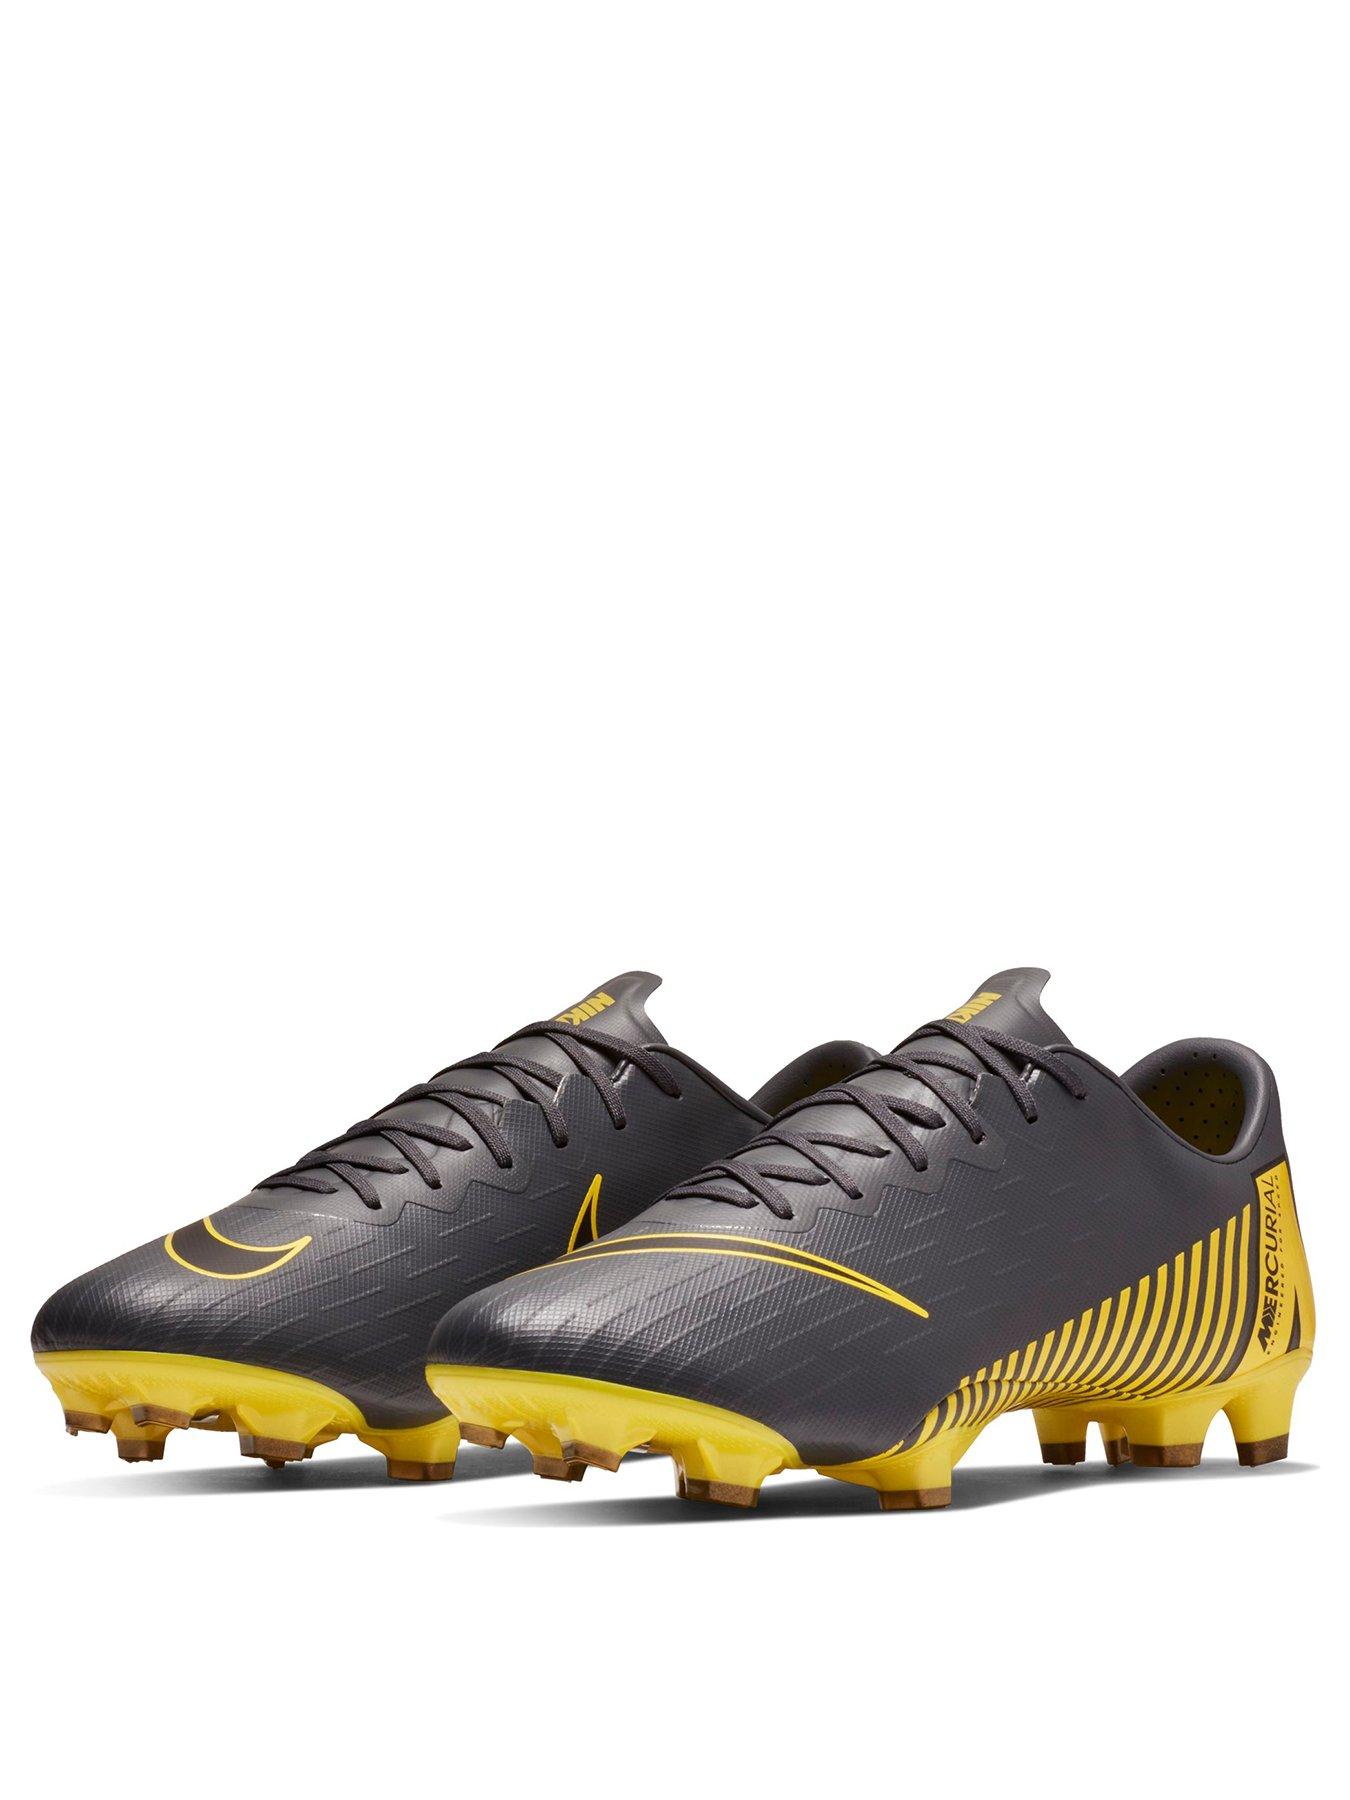 Nike Mercurial Vapor Superfly II FG Soccer Cleats Yellow Firm